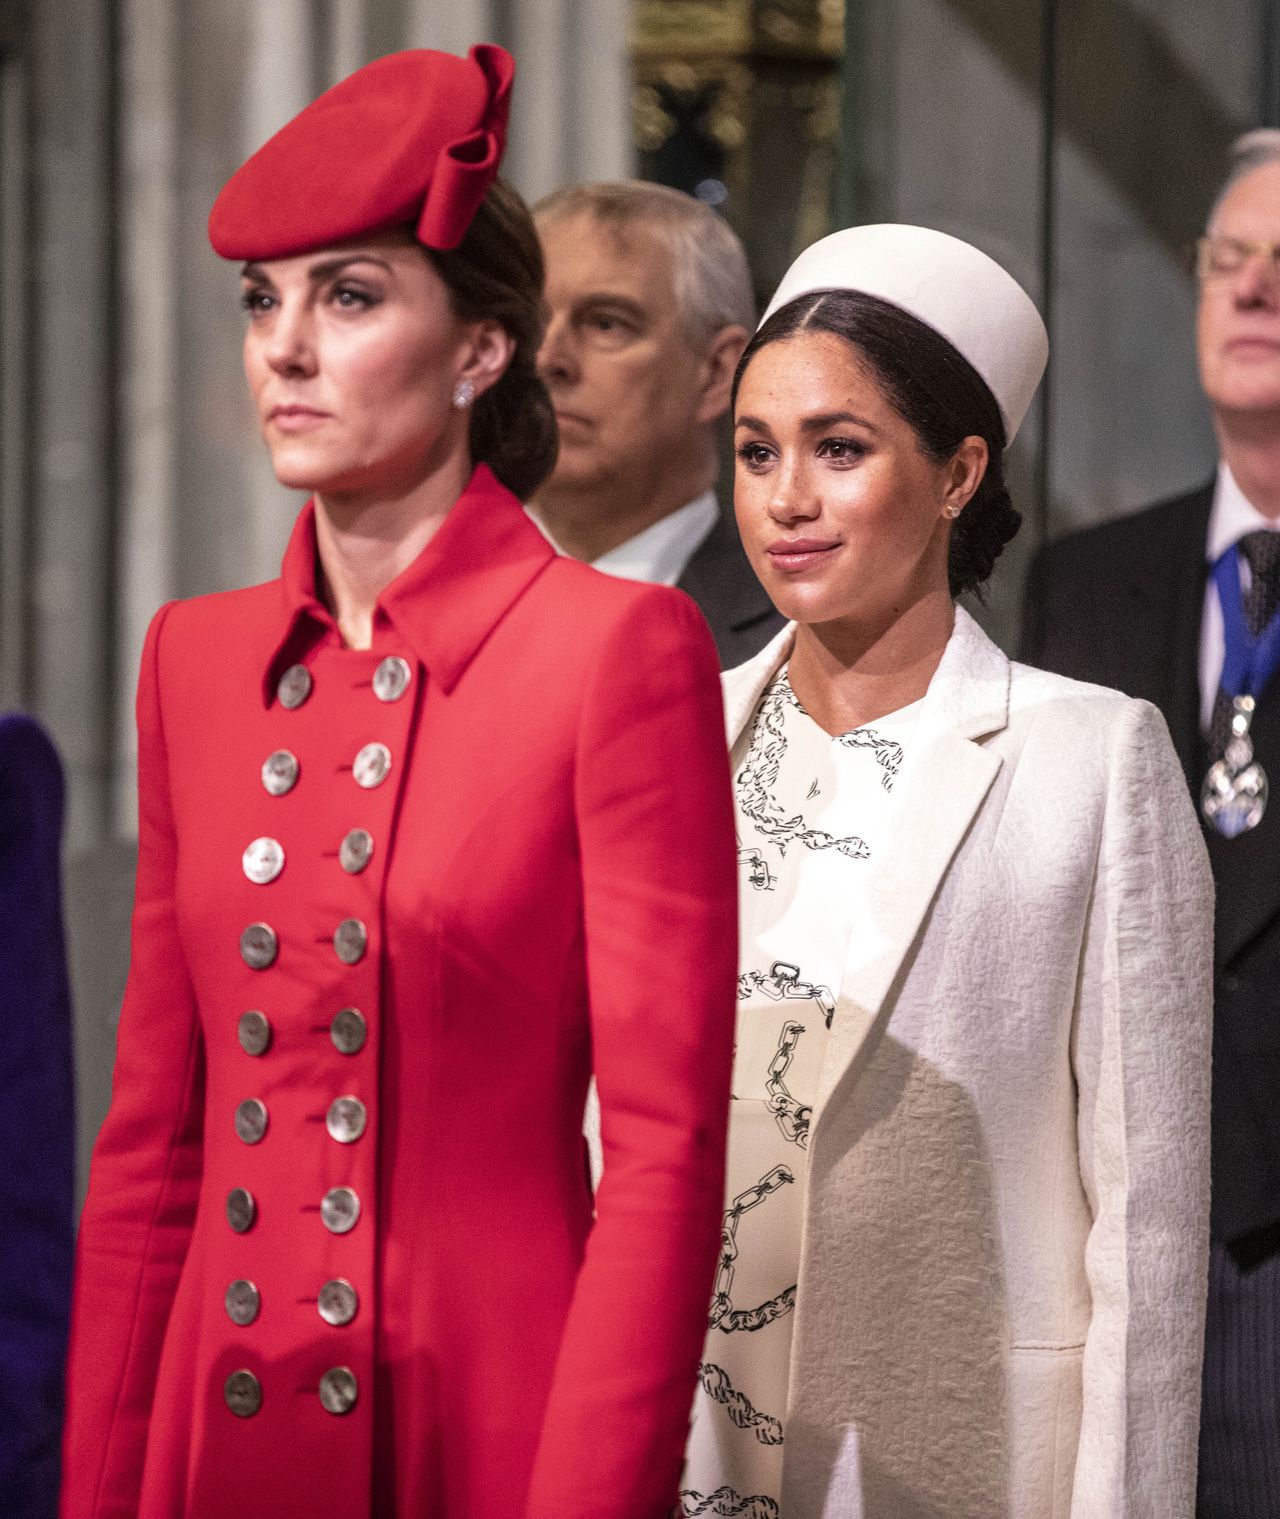 Will Meghan Markle reveal the behind-the-scenes of the conflict with Kate Middleton?